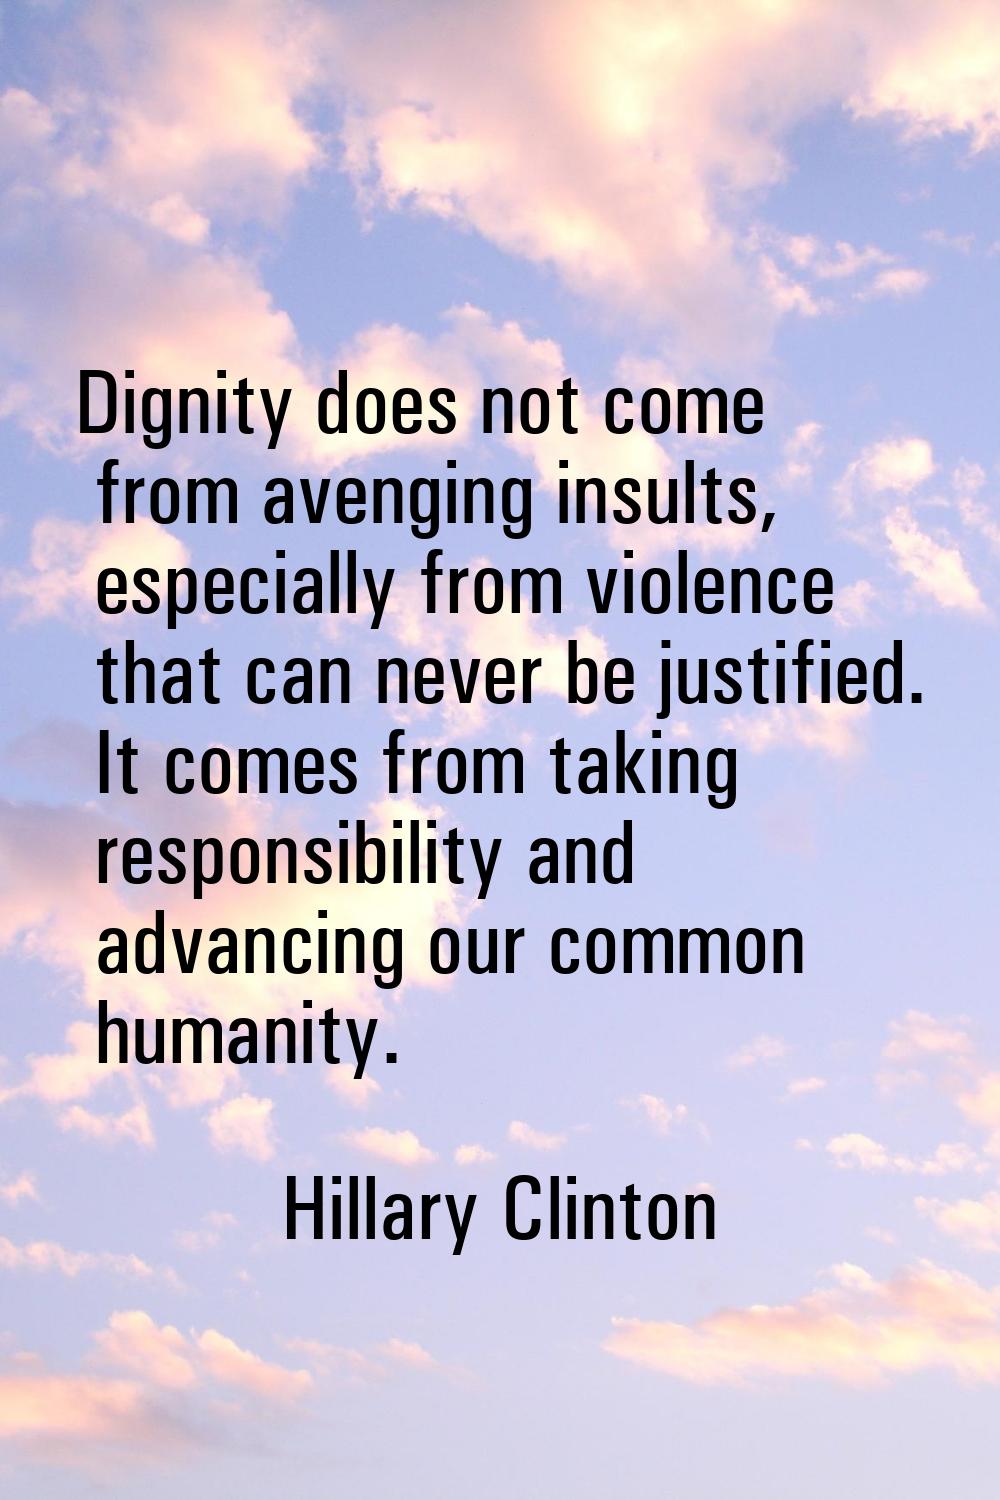 Dignity does not come from avenging insults, especially from violence that can never be justified. 